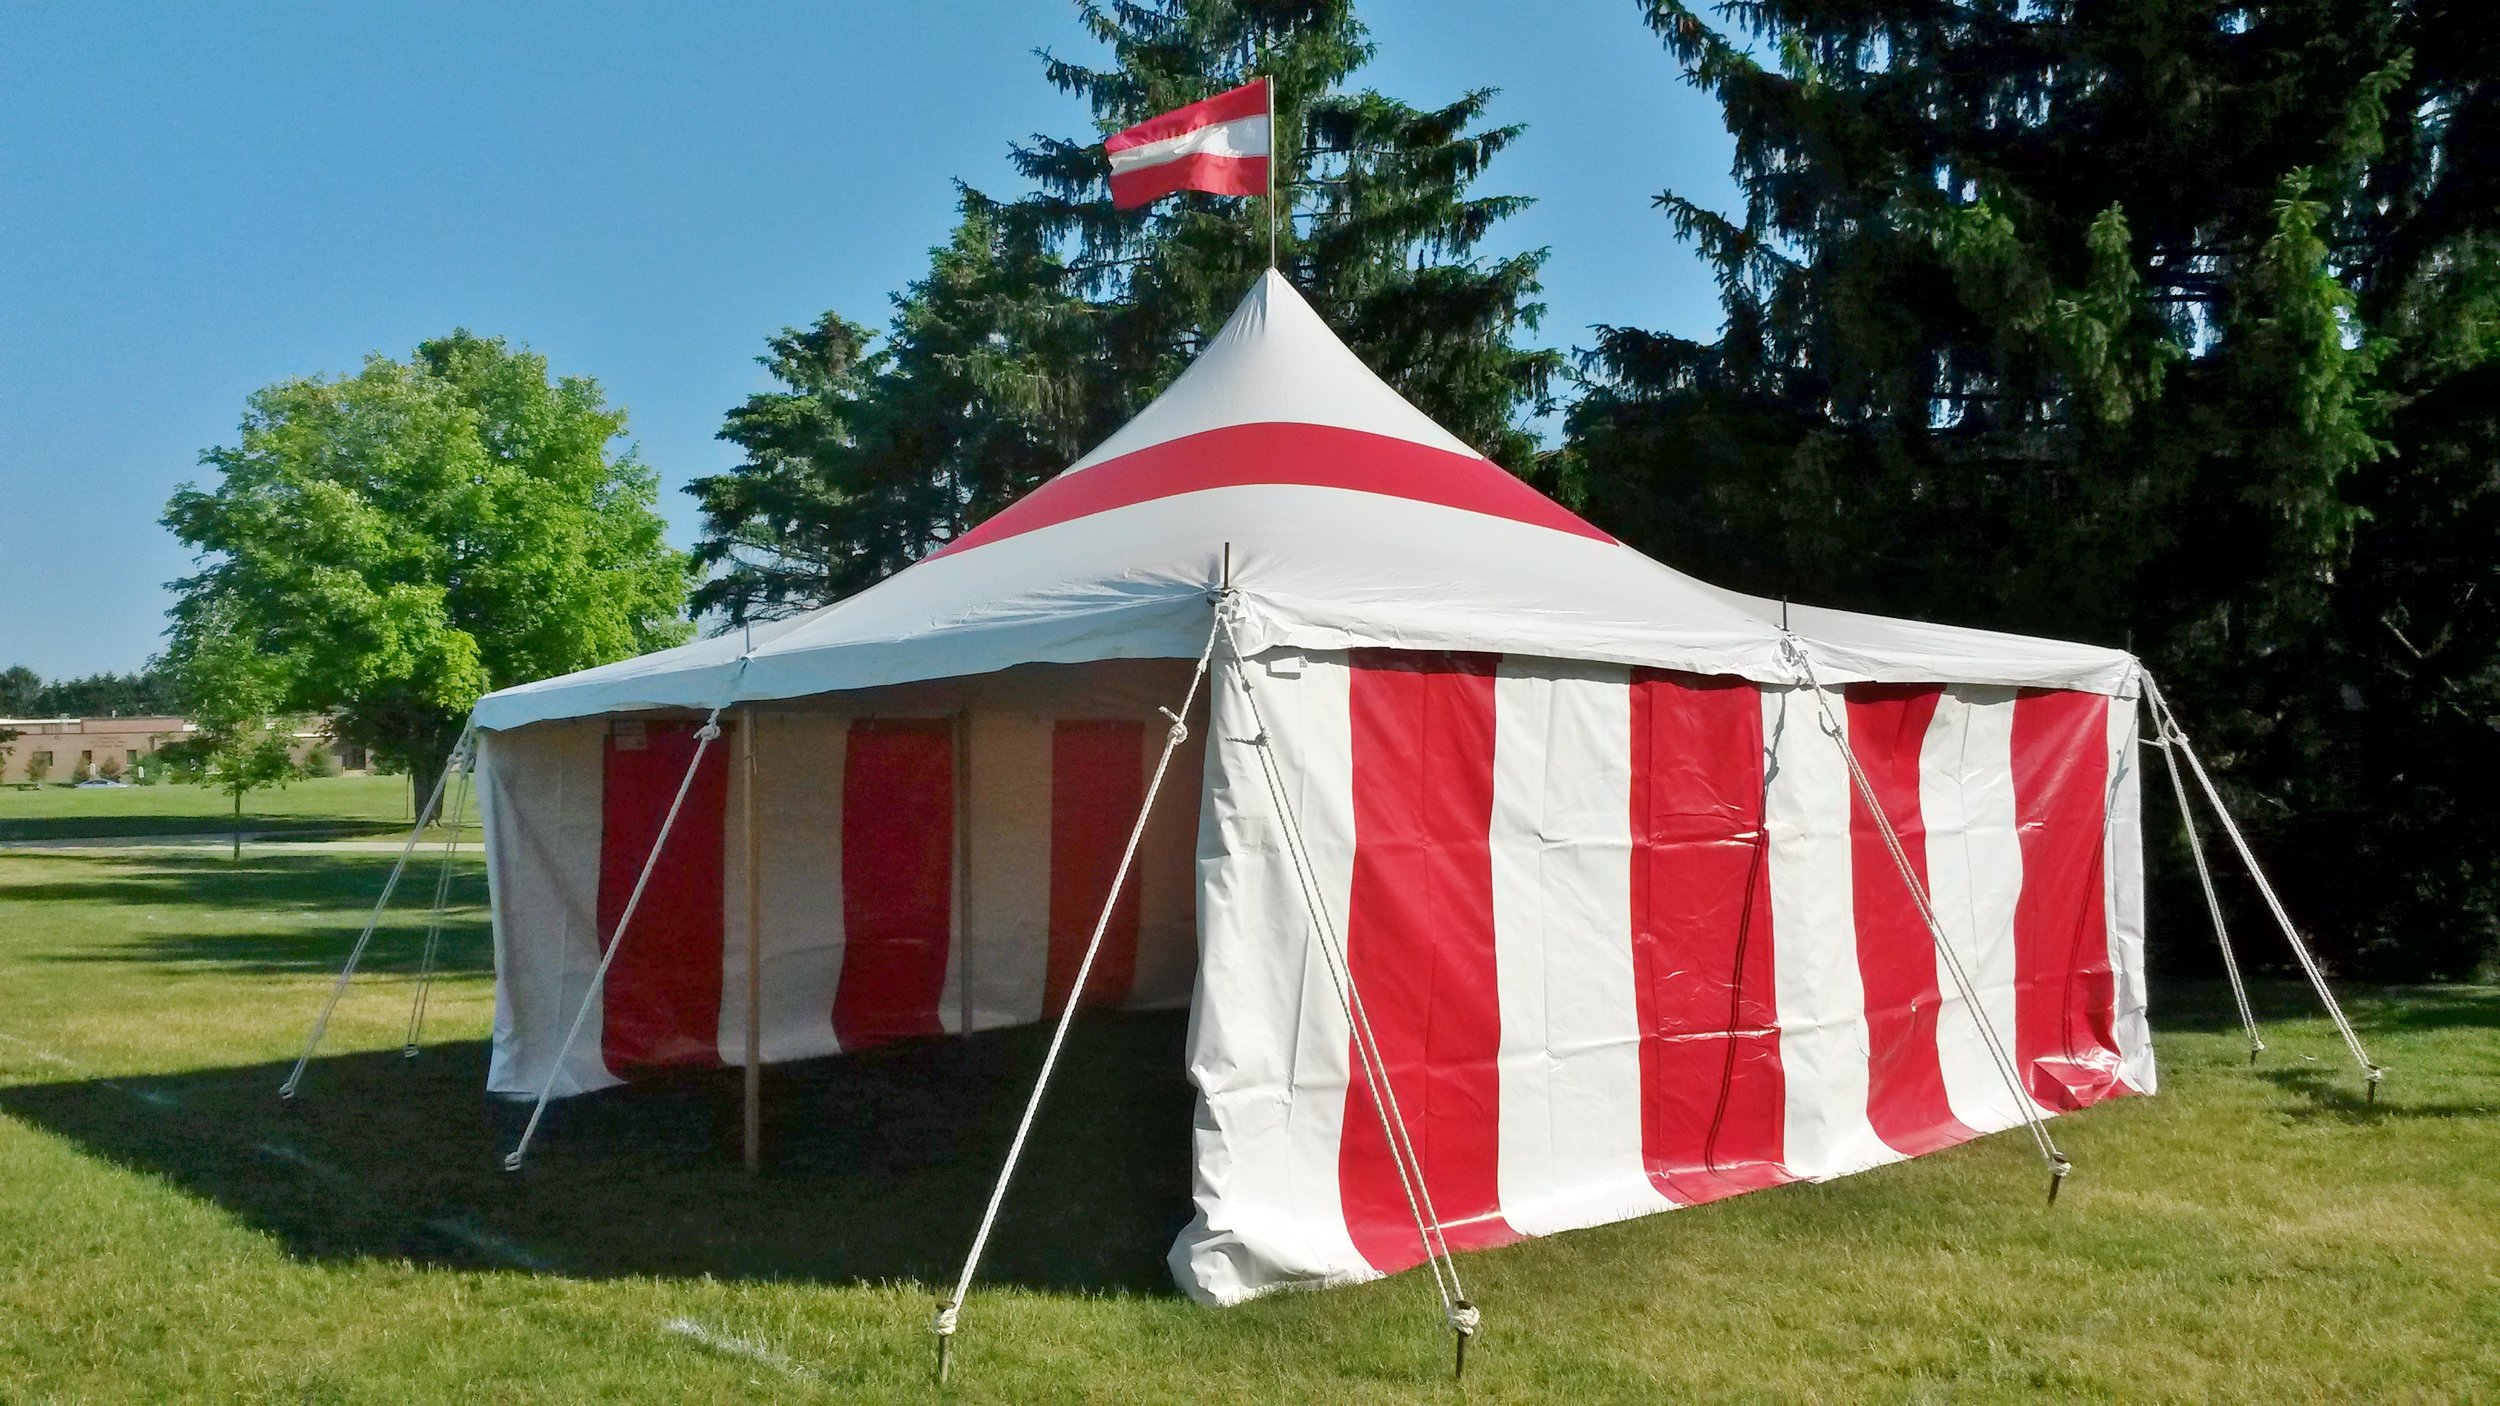 Small tents for rent in Lebanon PA